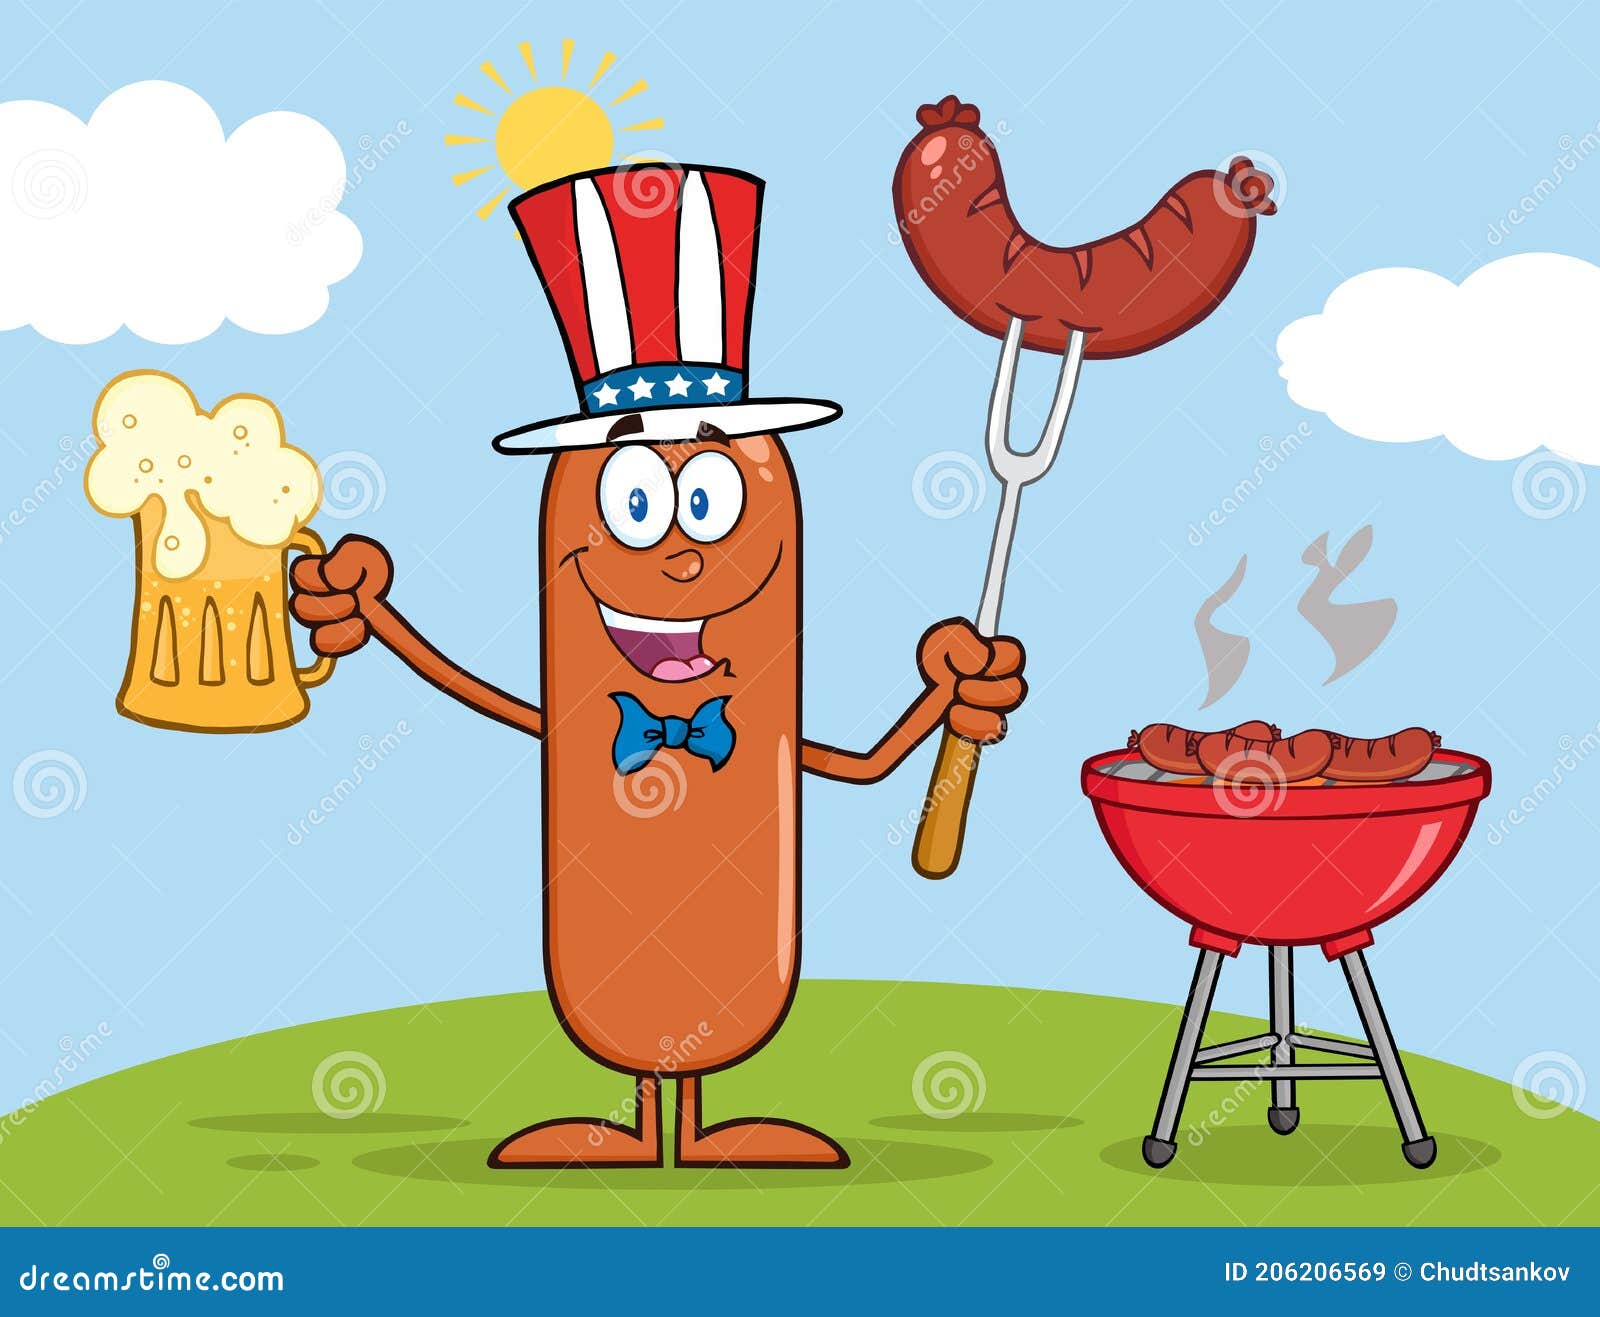 Patriotic Sausage Cartoon Character Holding a Beer and Weenie Next To BBQ  Stock Illustration - Illustration of glass, cute: 206206569